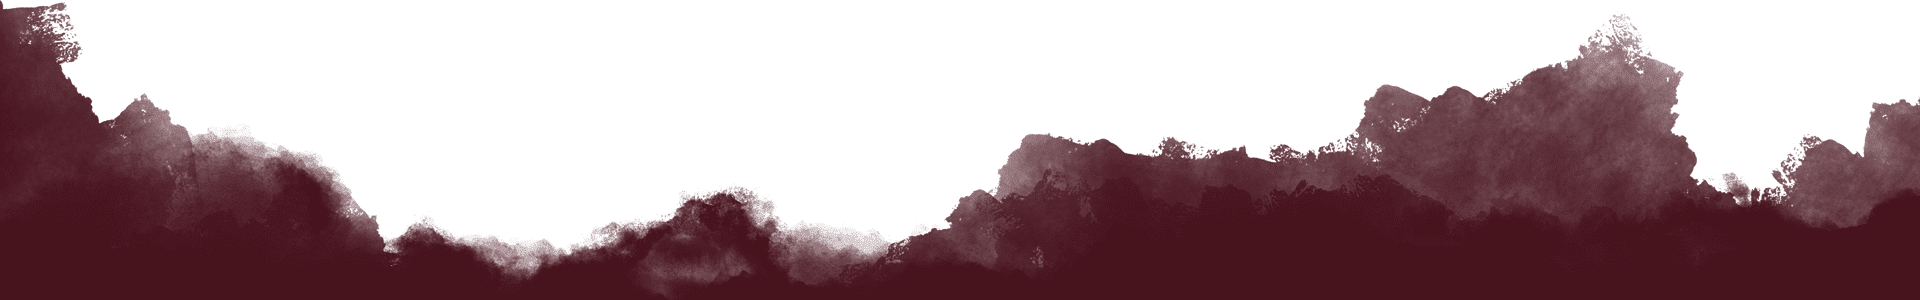 A green and maroon background with a red border.